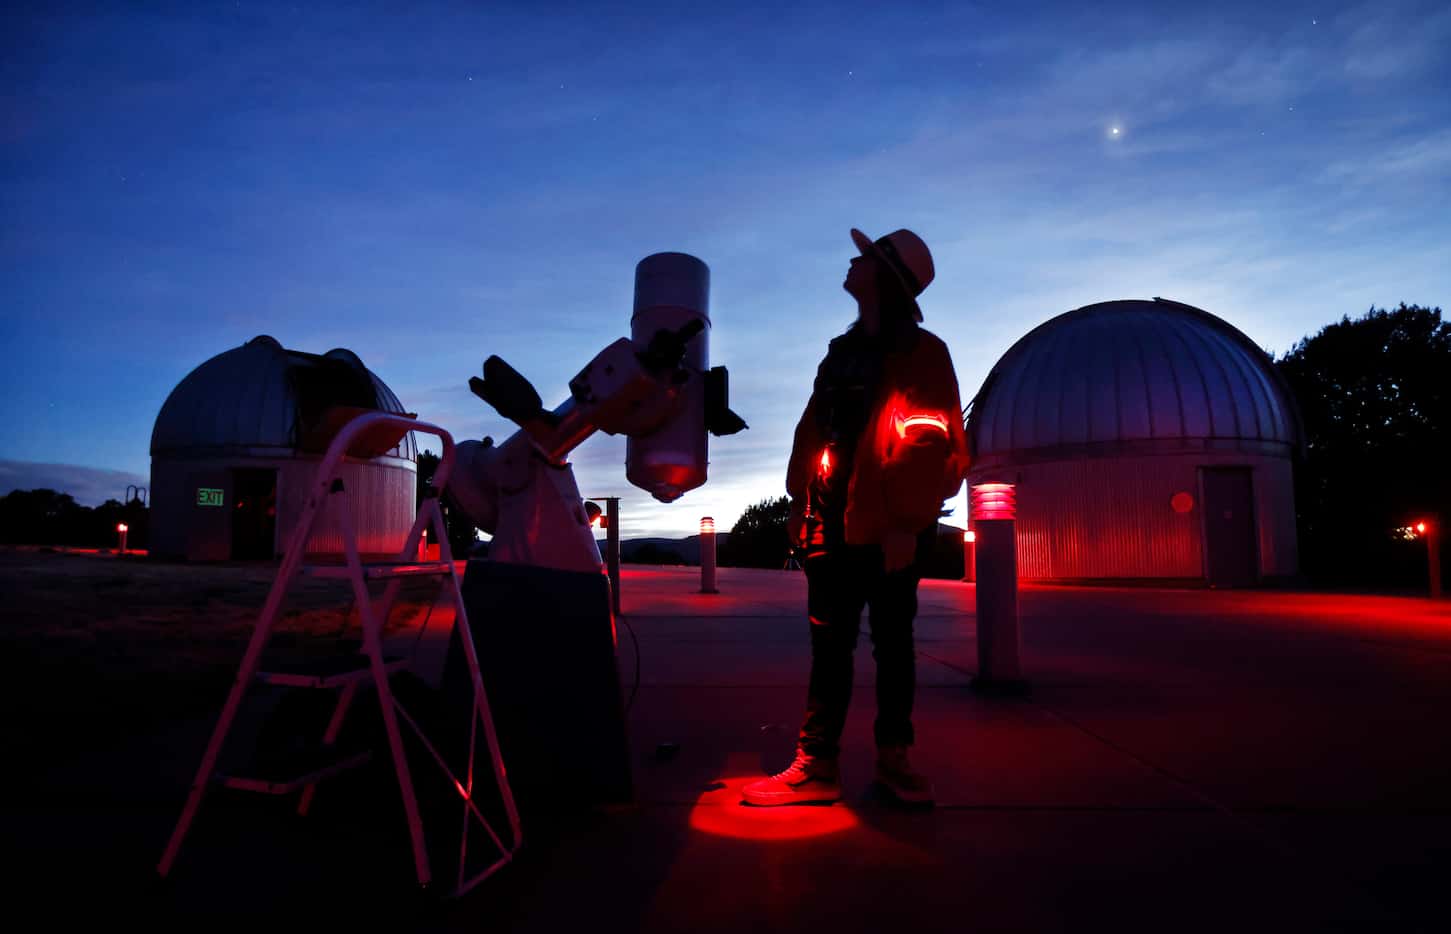 Telescope operator Tommy LePori looks skyward as he sets an 8” telescope for a star party in...